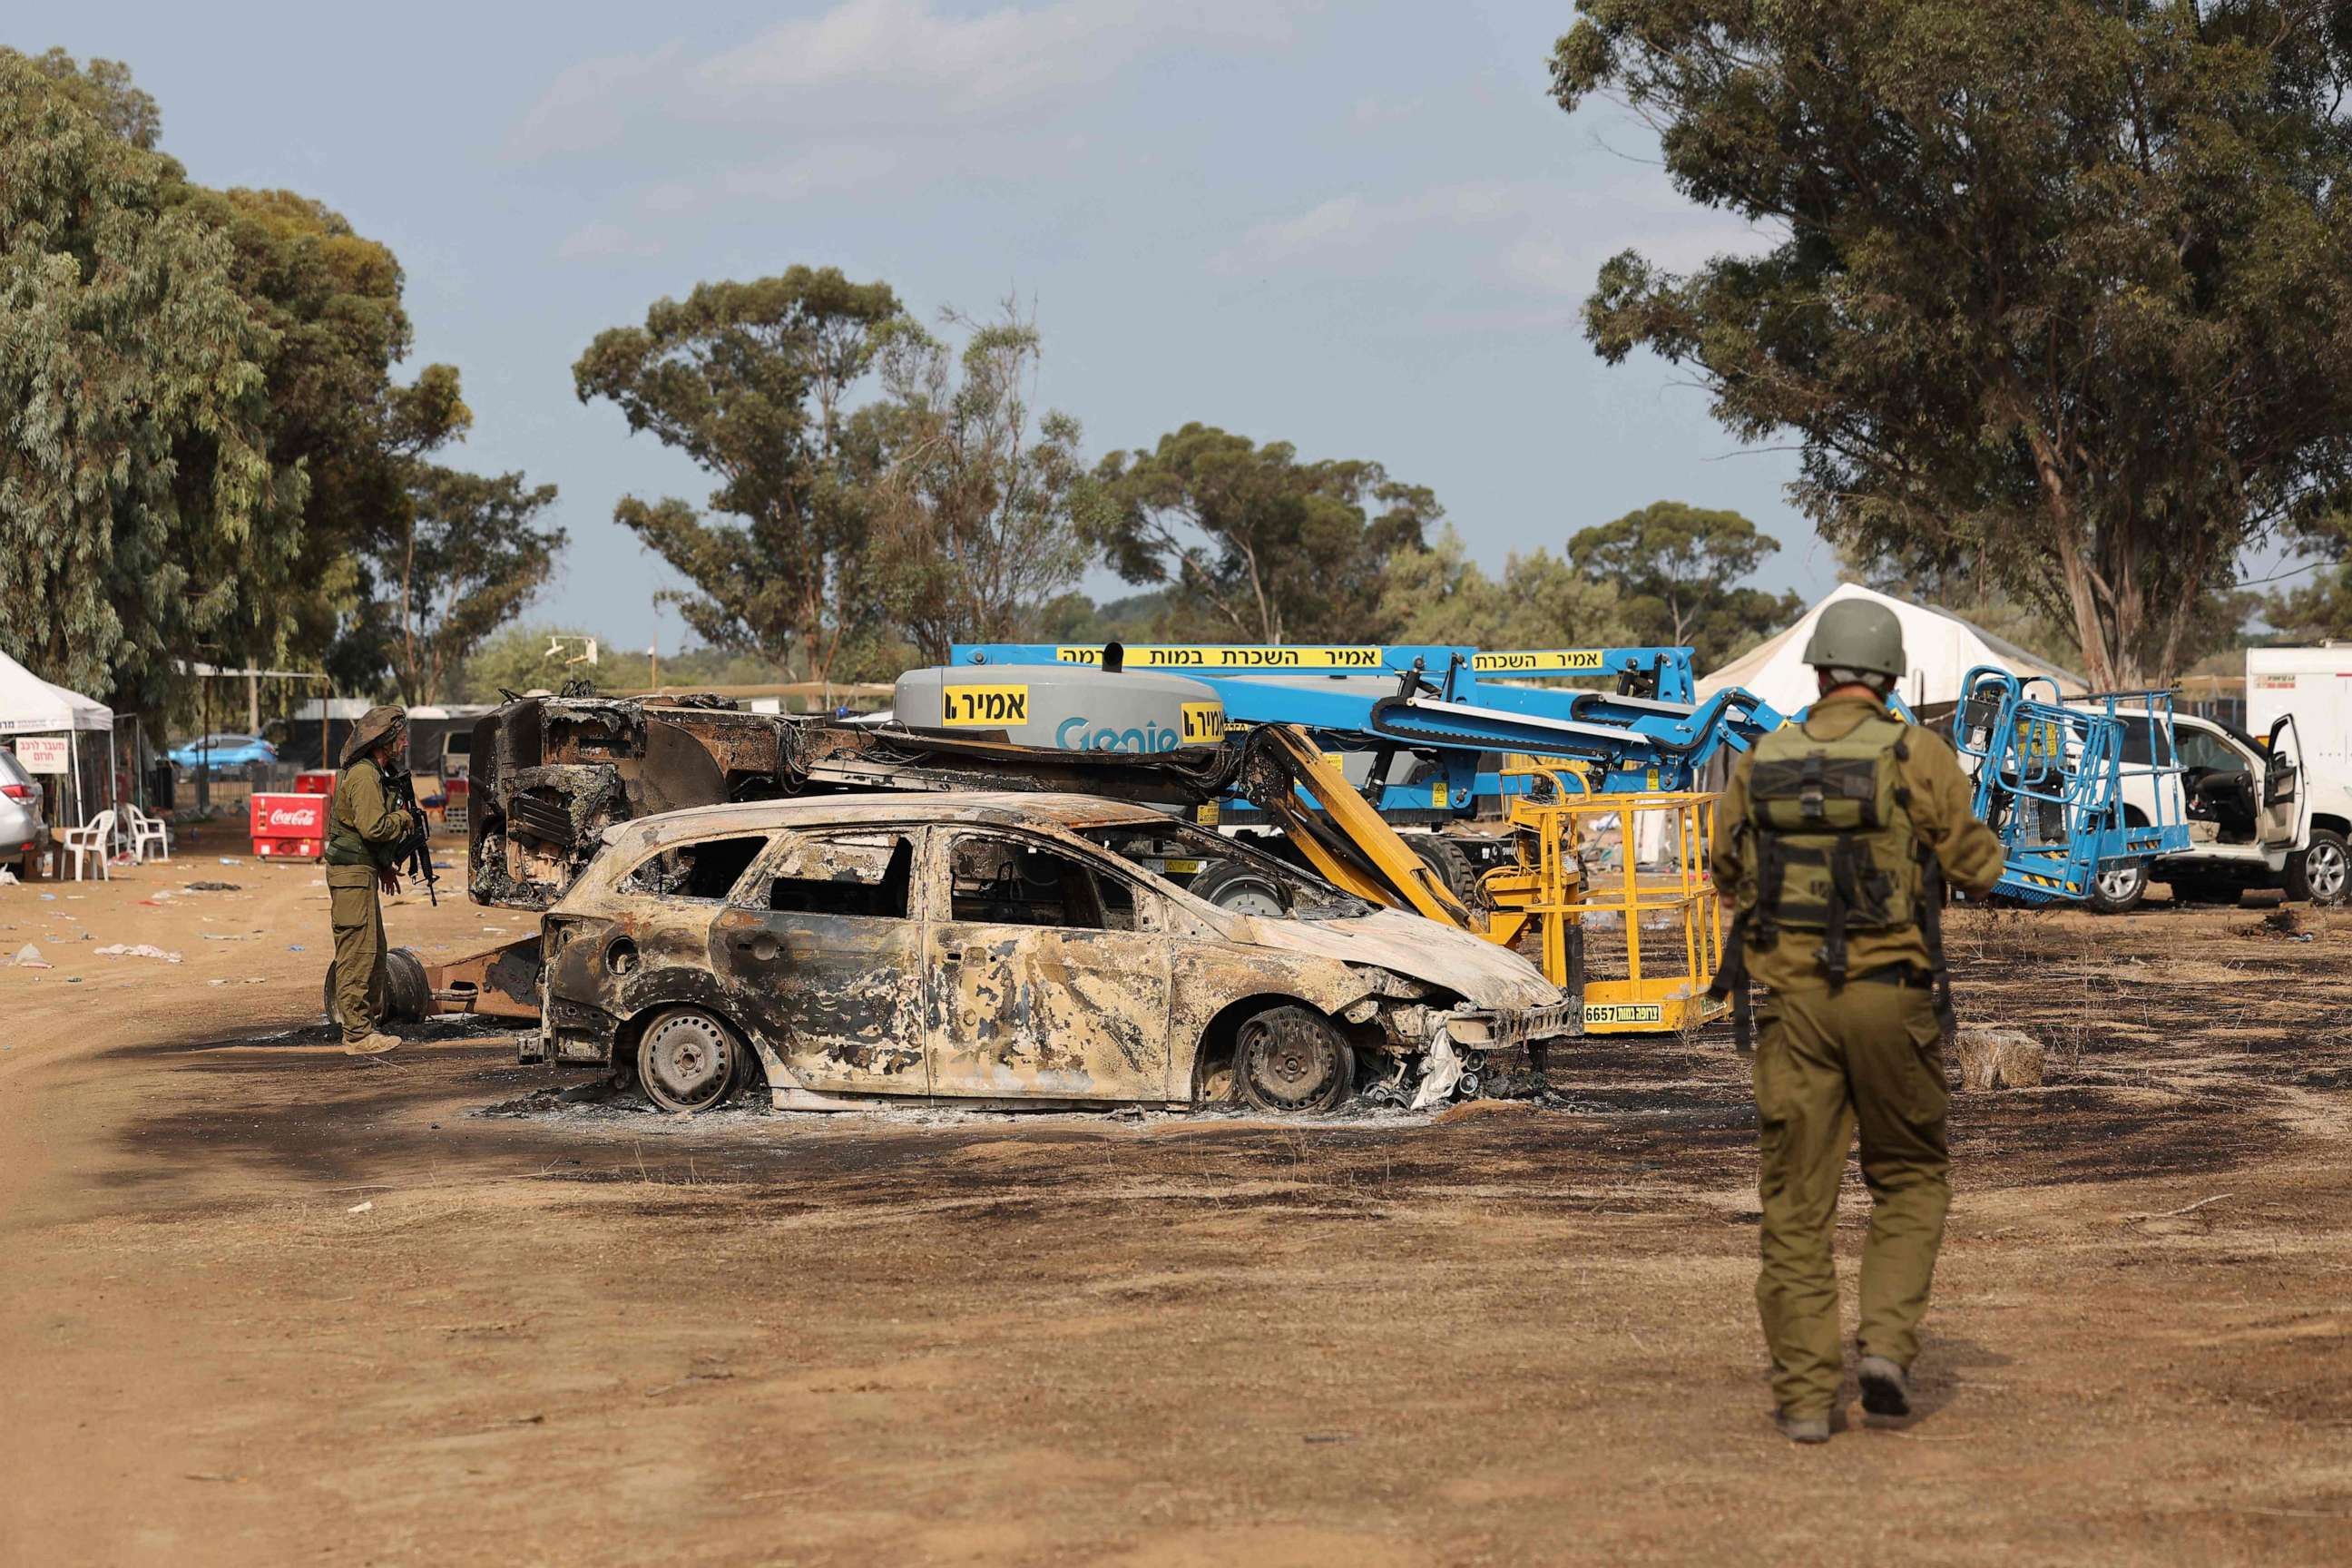 PHOTO: TOPSHOT - Israeli troops inspect the ravaged site of the weekend attack on the Supernova desert music Festival by Palestinian militants near Kibbutz Reim in the Negev desert in southern Israel on October 10, 2023.